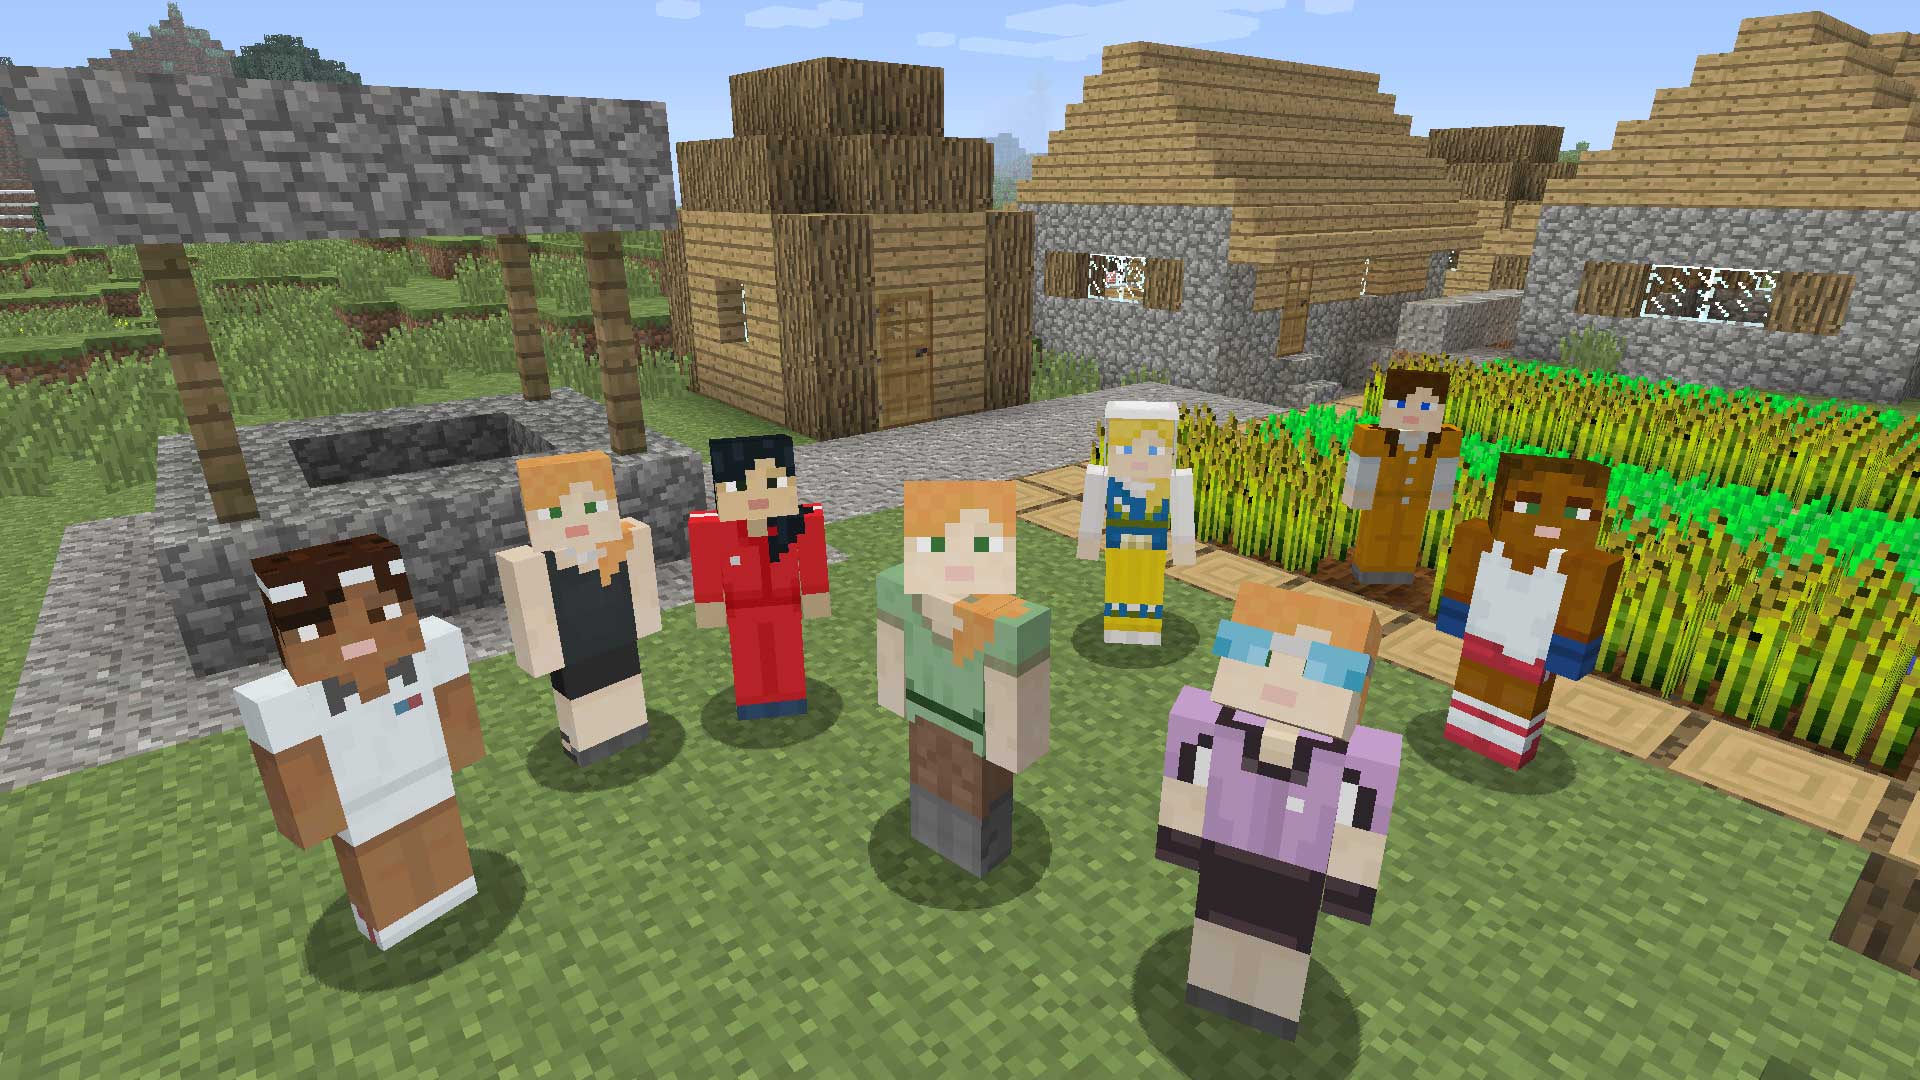 A group of Minecraft characters looking up at the viewer